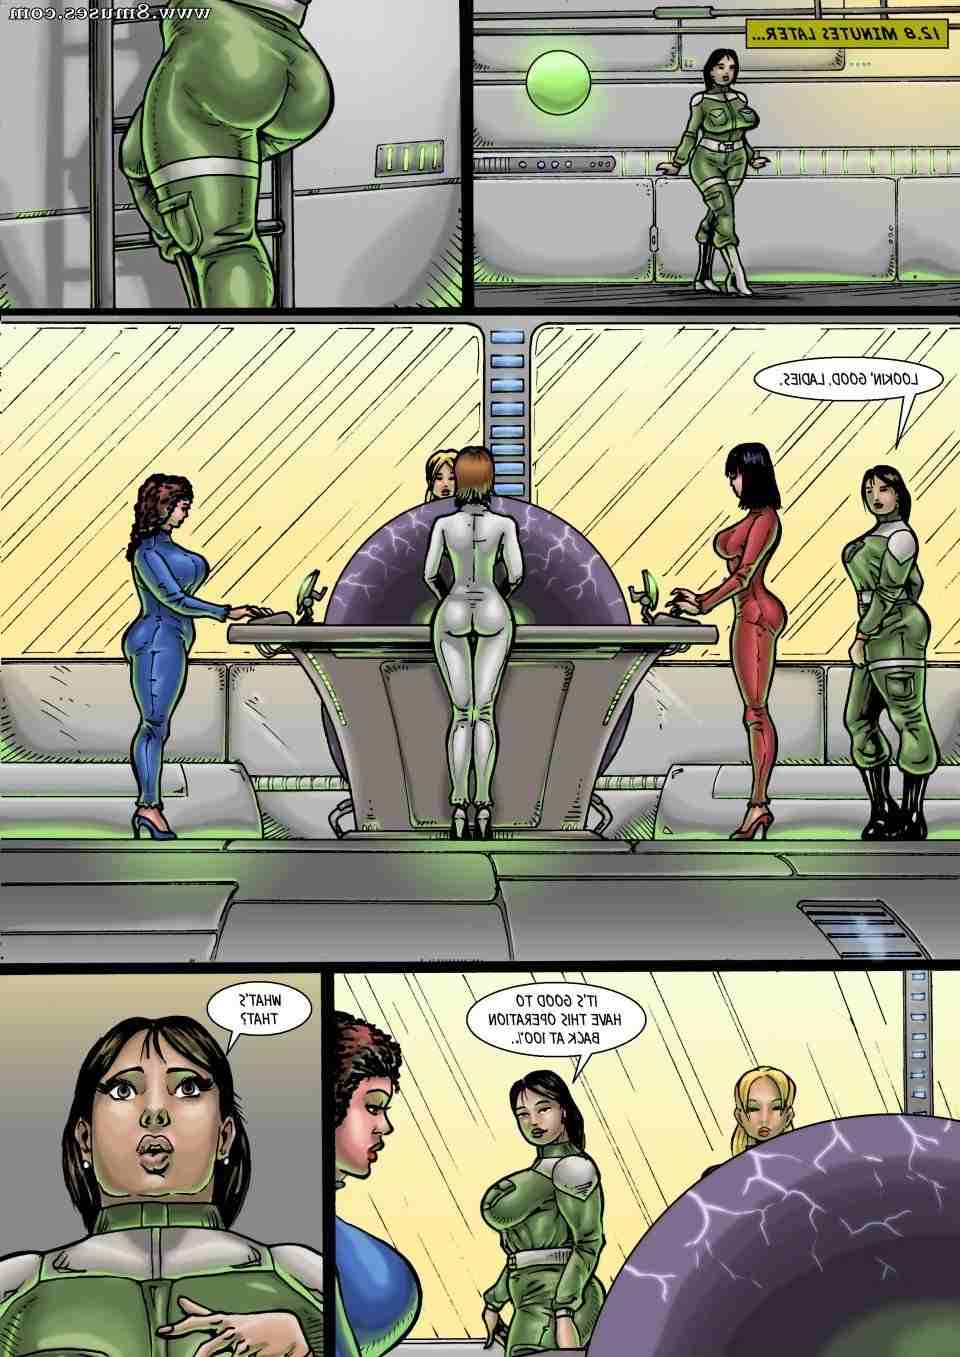 Various-Authors/Predator/Sex-Droids-in-Space Sex_Droids_in_Space__8muses_-_Sex_and_Porn_Comics_14.jpg